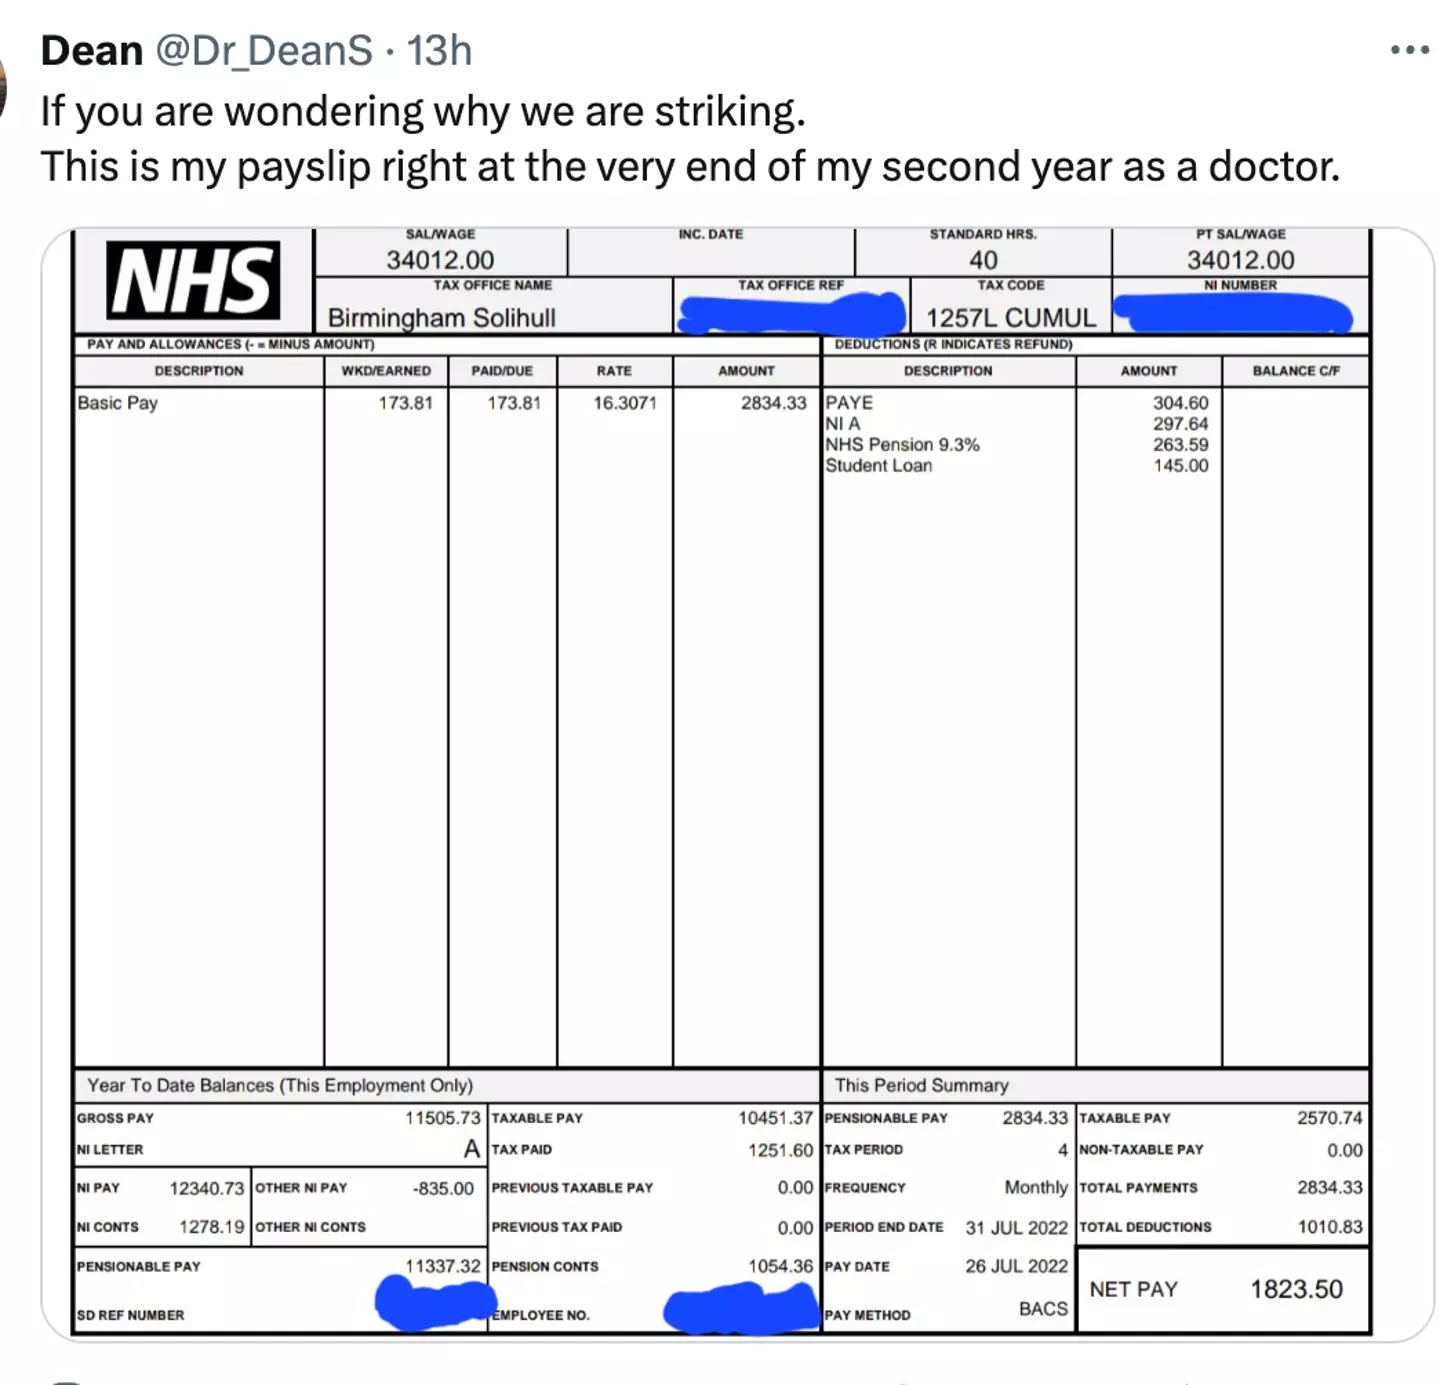 Dean shared his payslip after two years on the job.